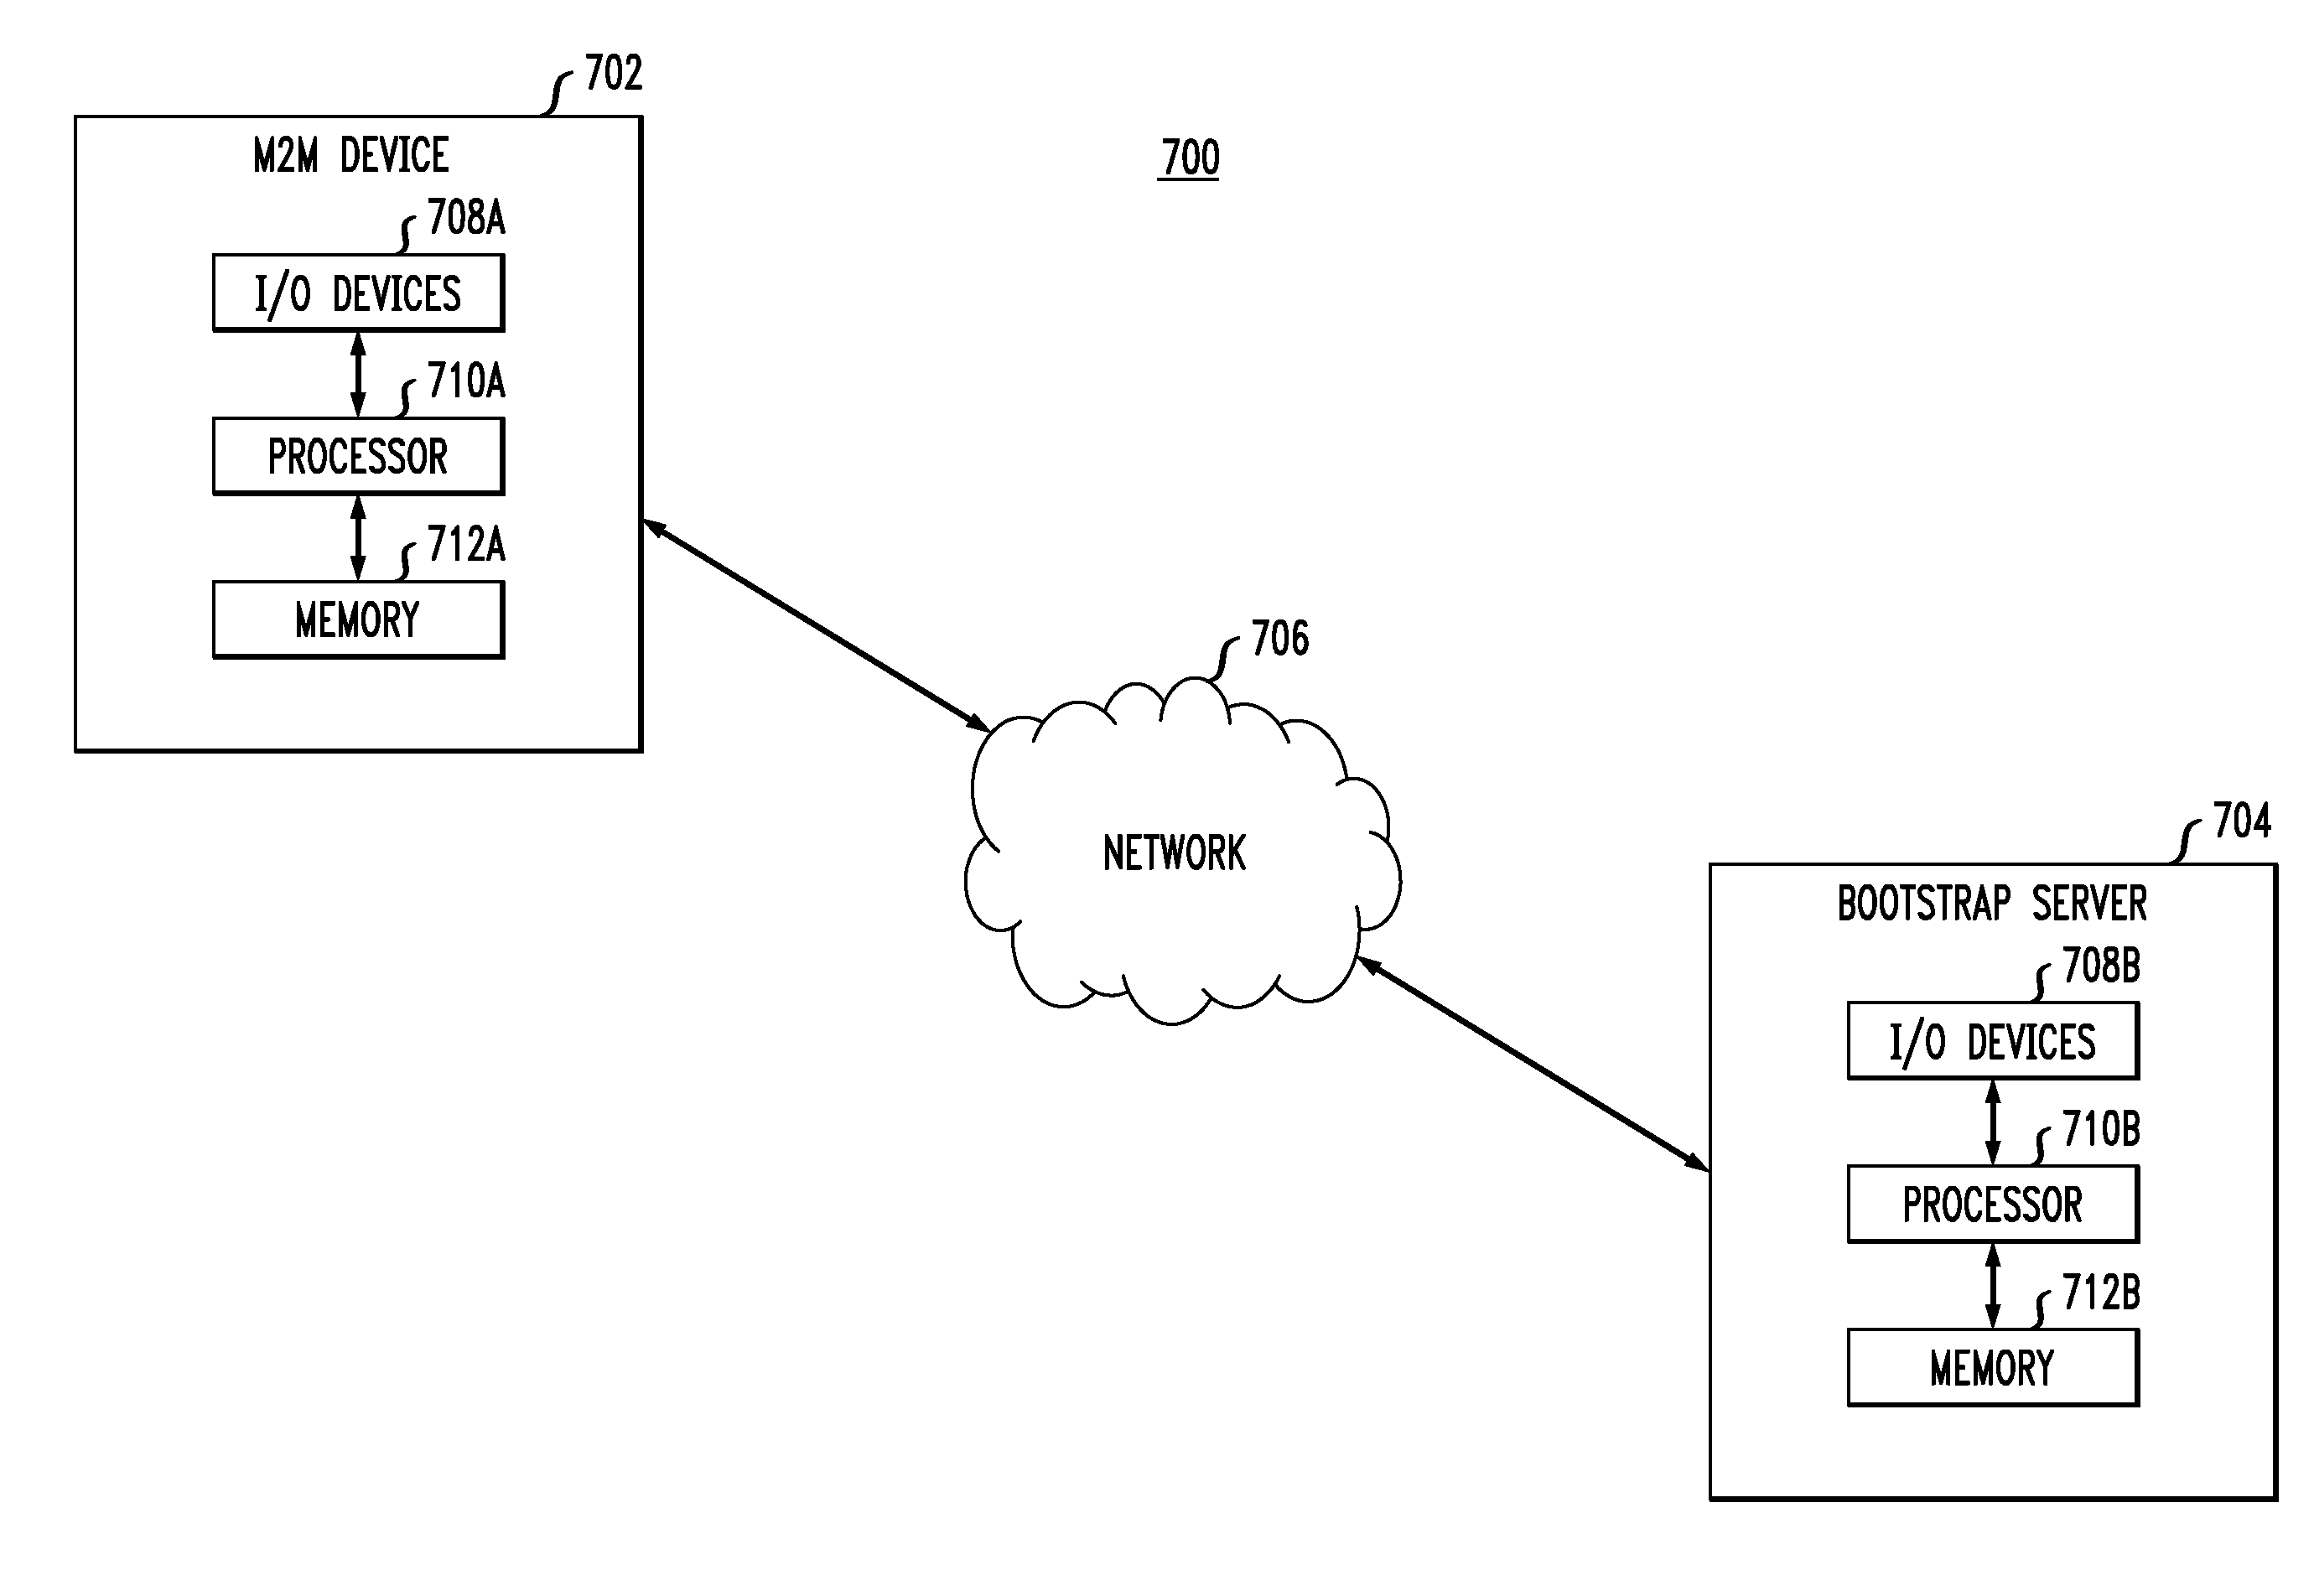 Automated security provisioning protocol for wide area network communication devices in open device environment